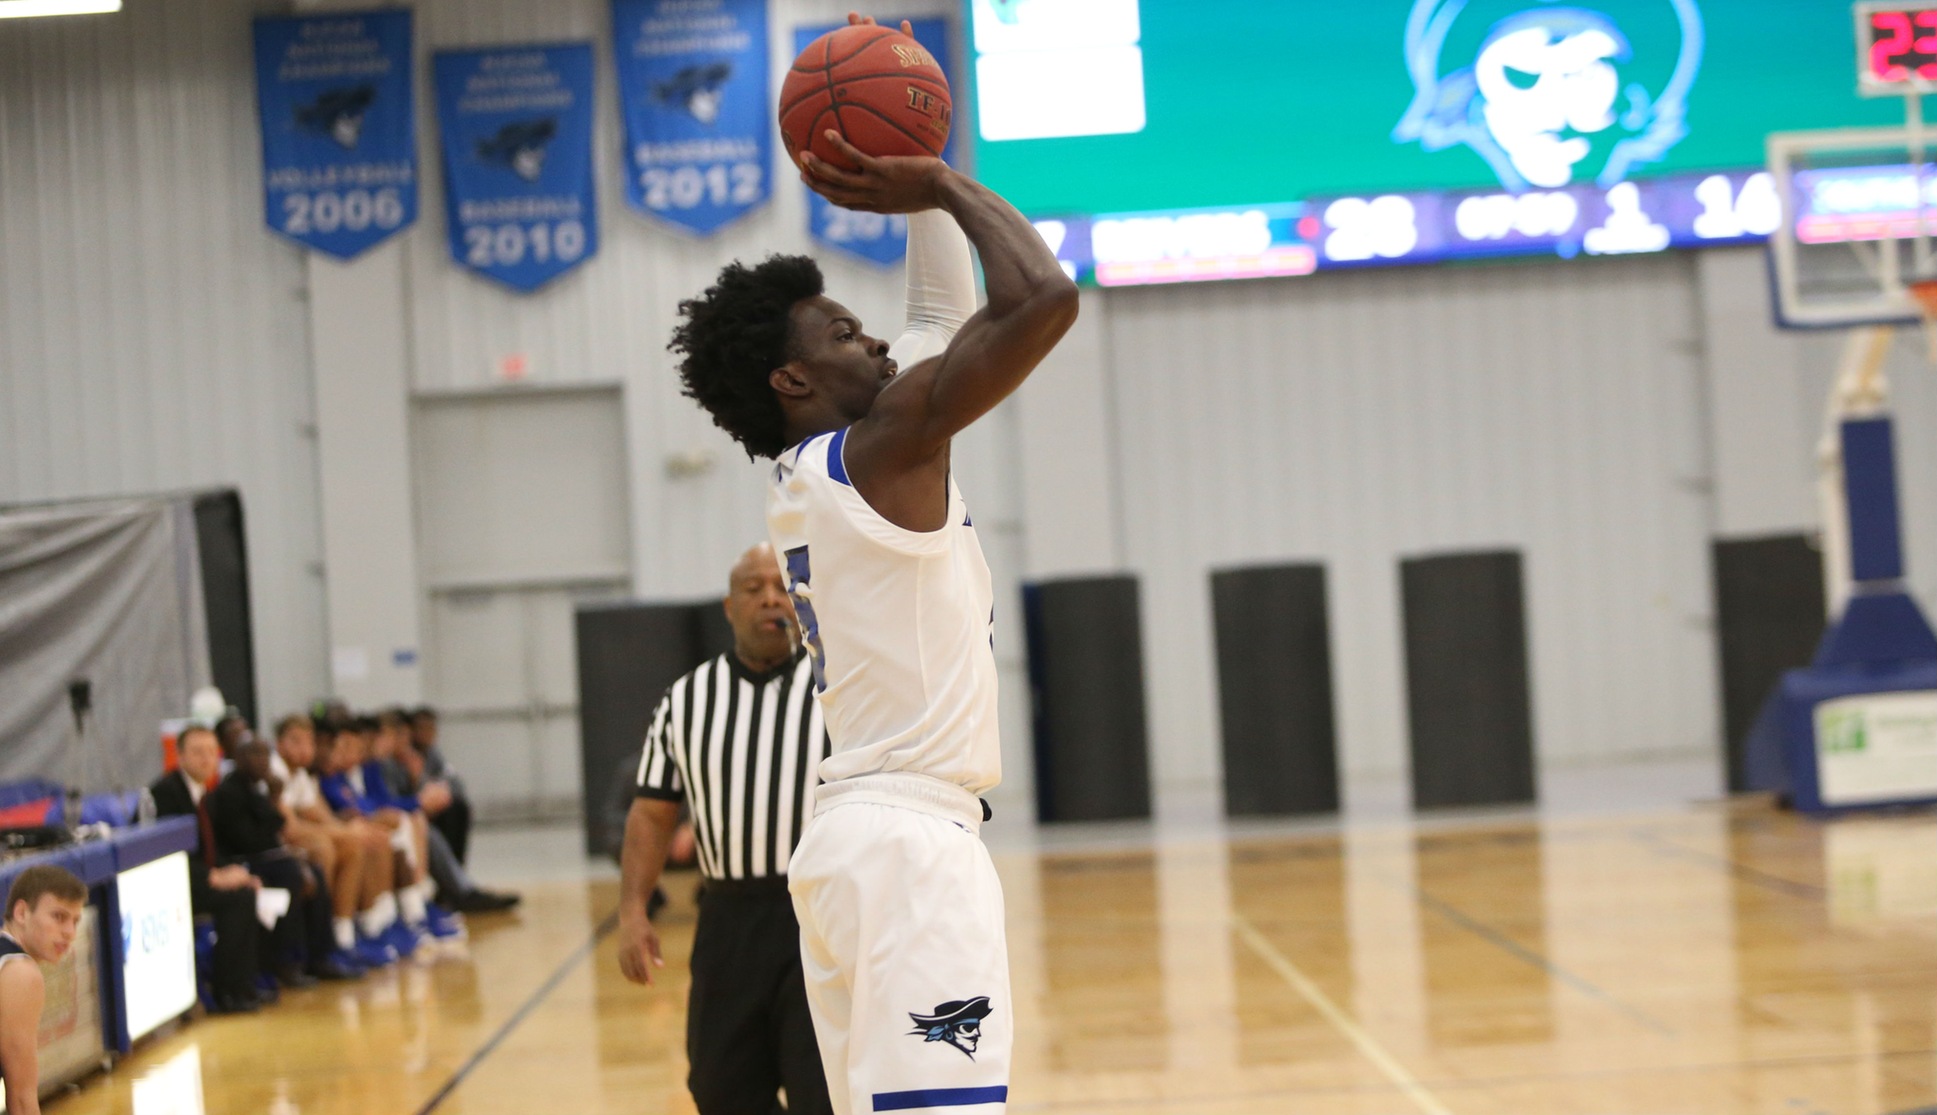 Iowa Western's Travon Broadway scored a game high 22 points on 9/12 shooting, as the Reivers claimed their third classic title this season with a 76-68 "wire-to-wire" victory over Northeastern (CO).